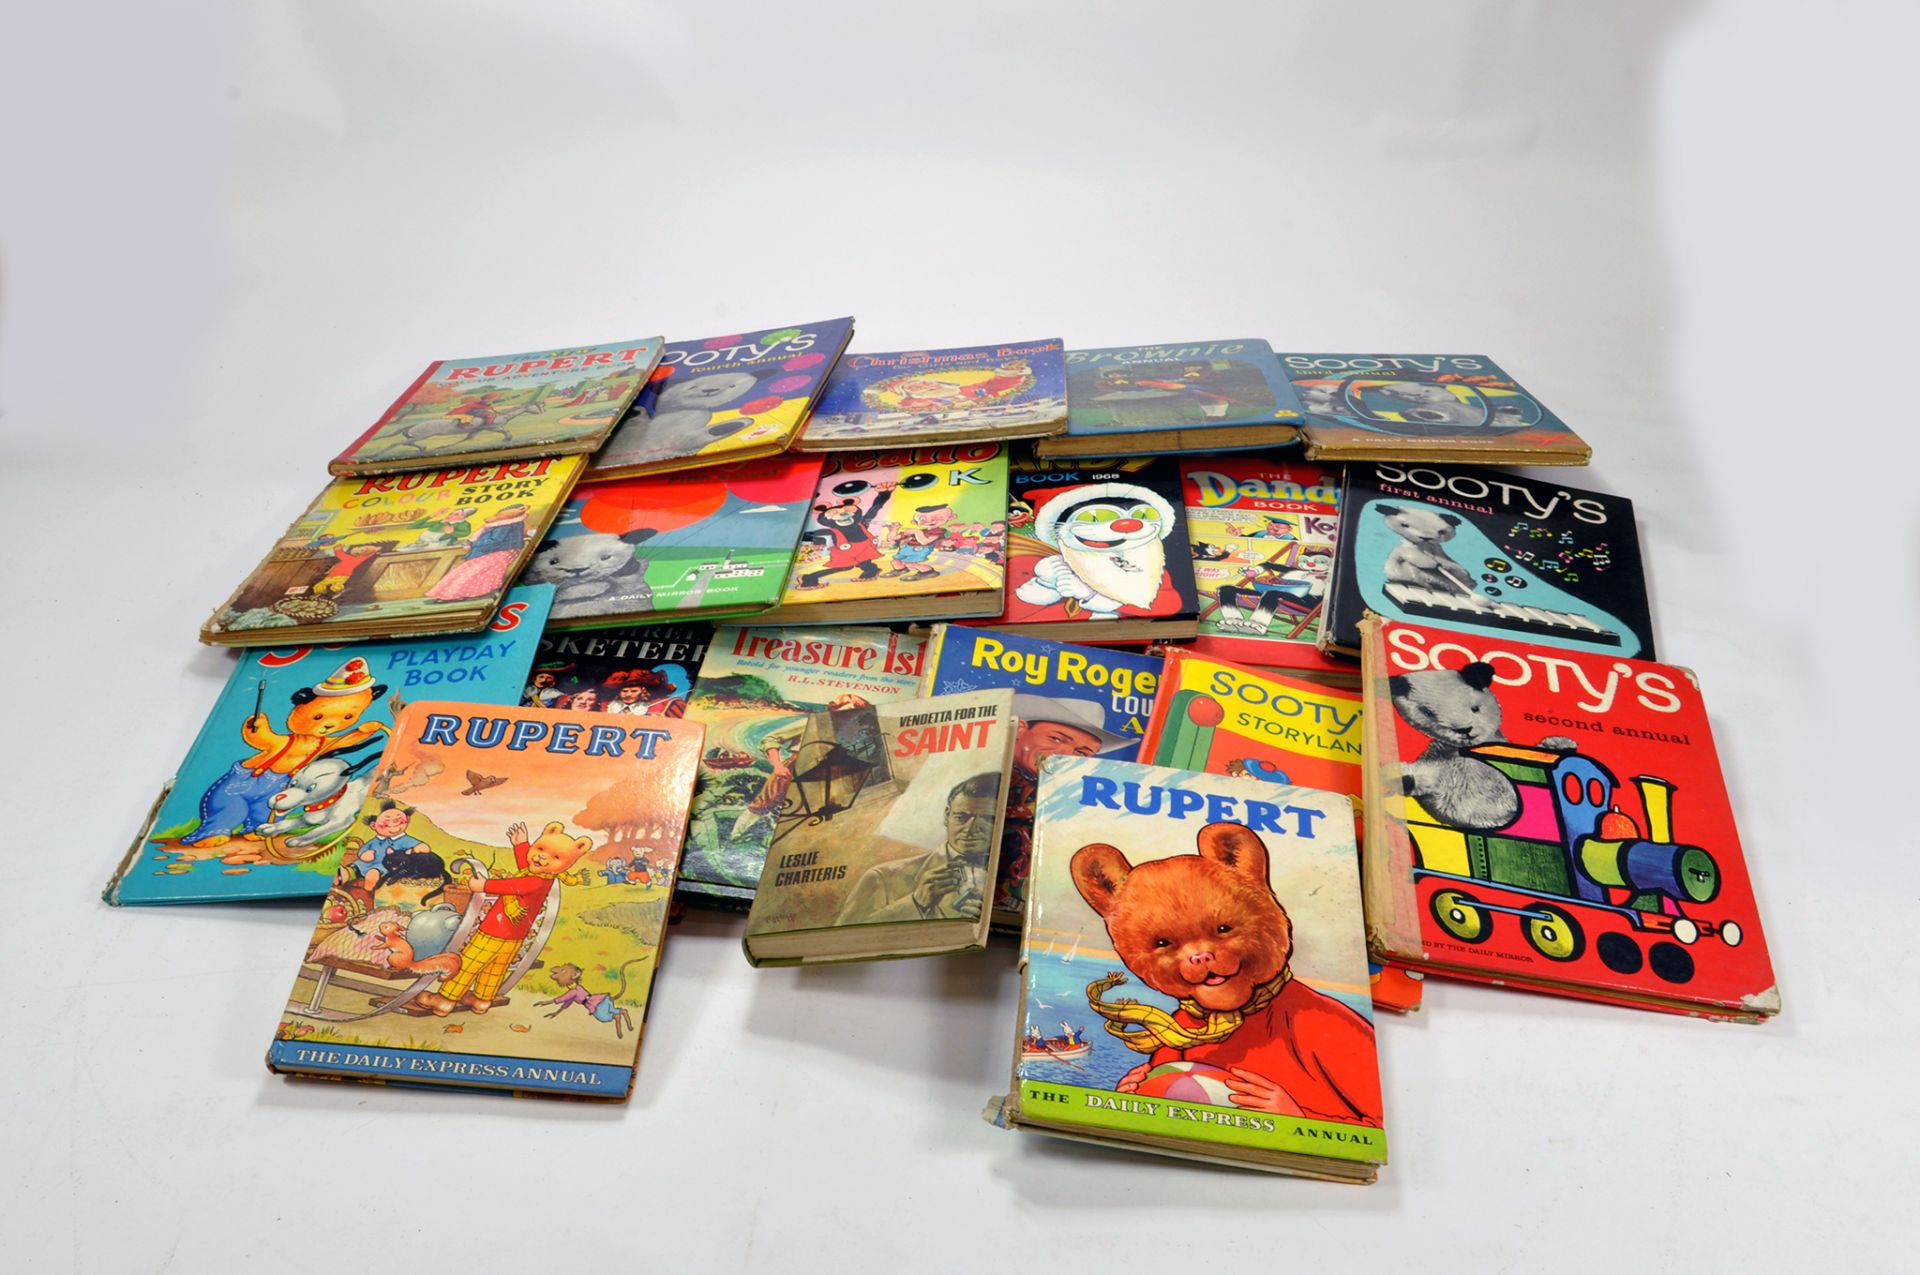 An interesting group of old annuals and literature comprising Rupert, Sooty, Dandy and others.